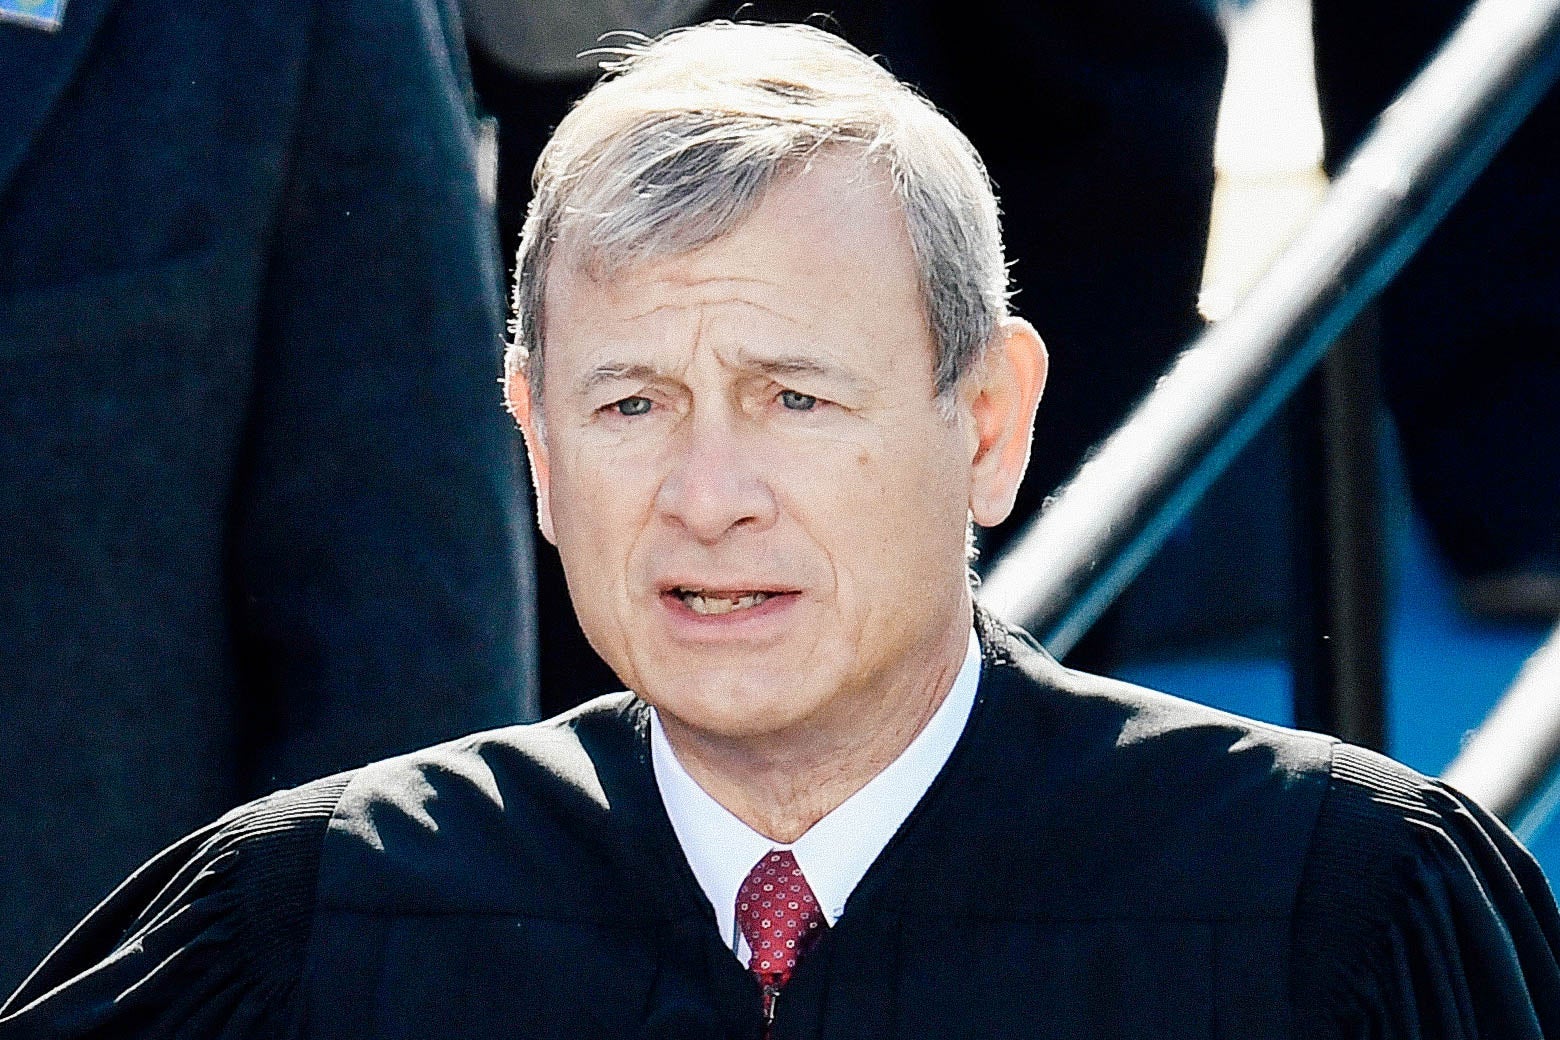 Chief Justice John Roberts stands outside in his robes as he administers the oath of office to Biden